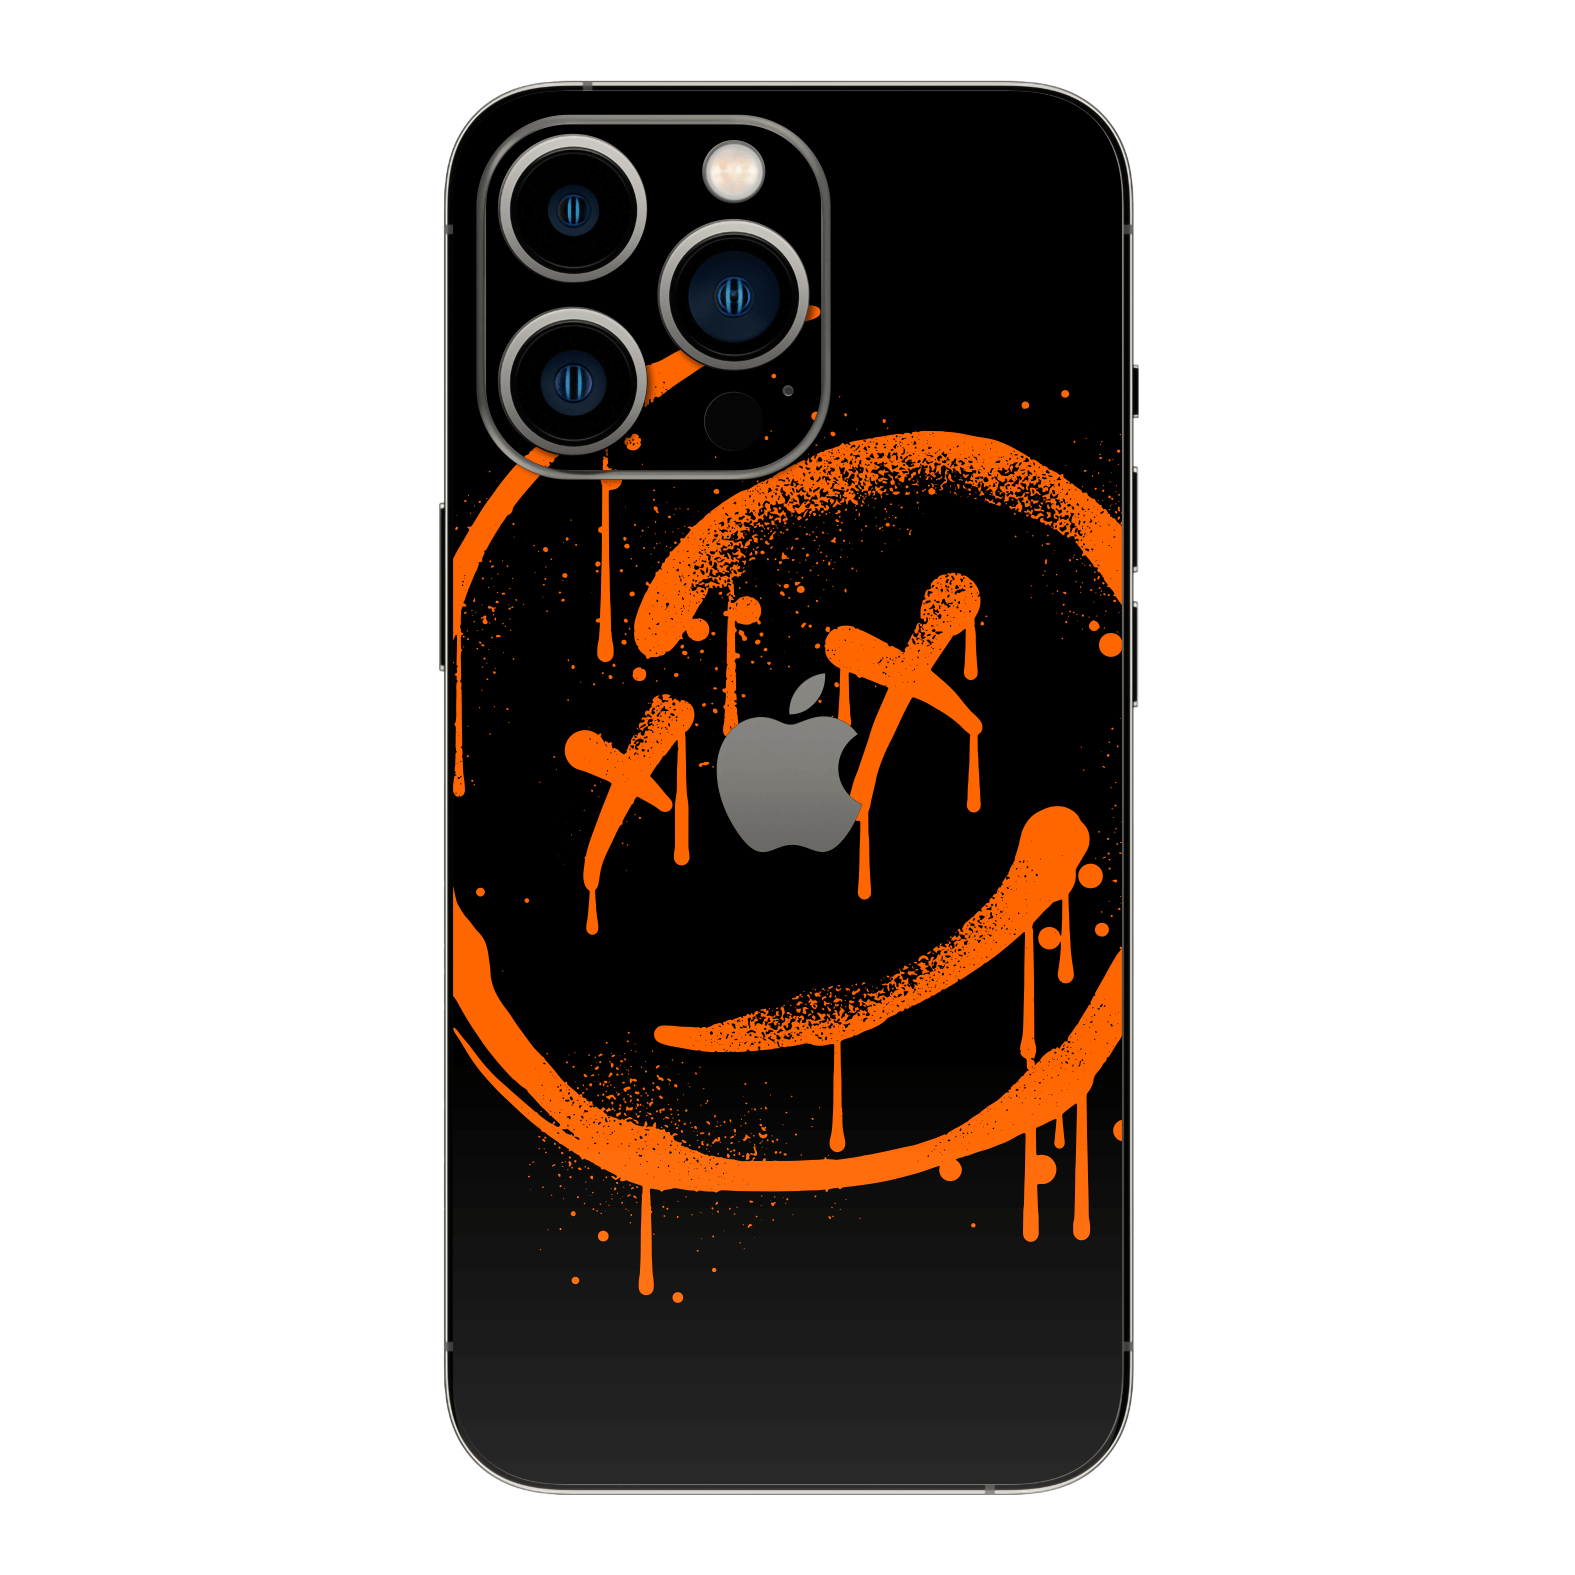 iPhone 13 PRO SIGNATURE Orange Paint on Black Skin - Premium Protective Skin Wrap Sticker Decal Cover by QSKINZ | Qskinz.com